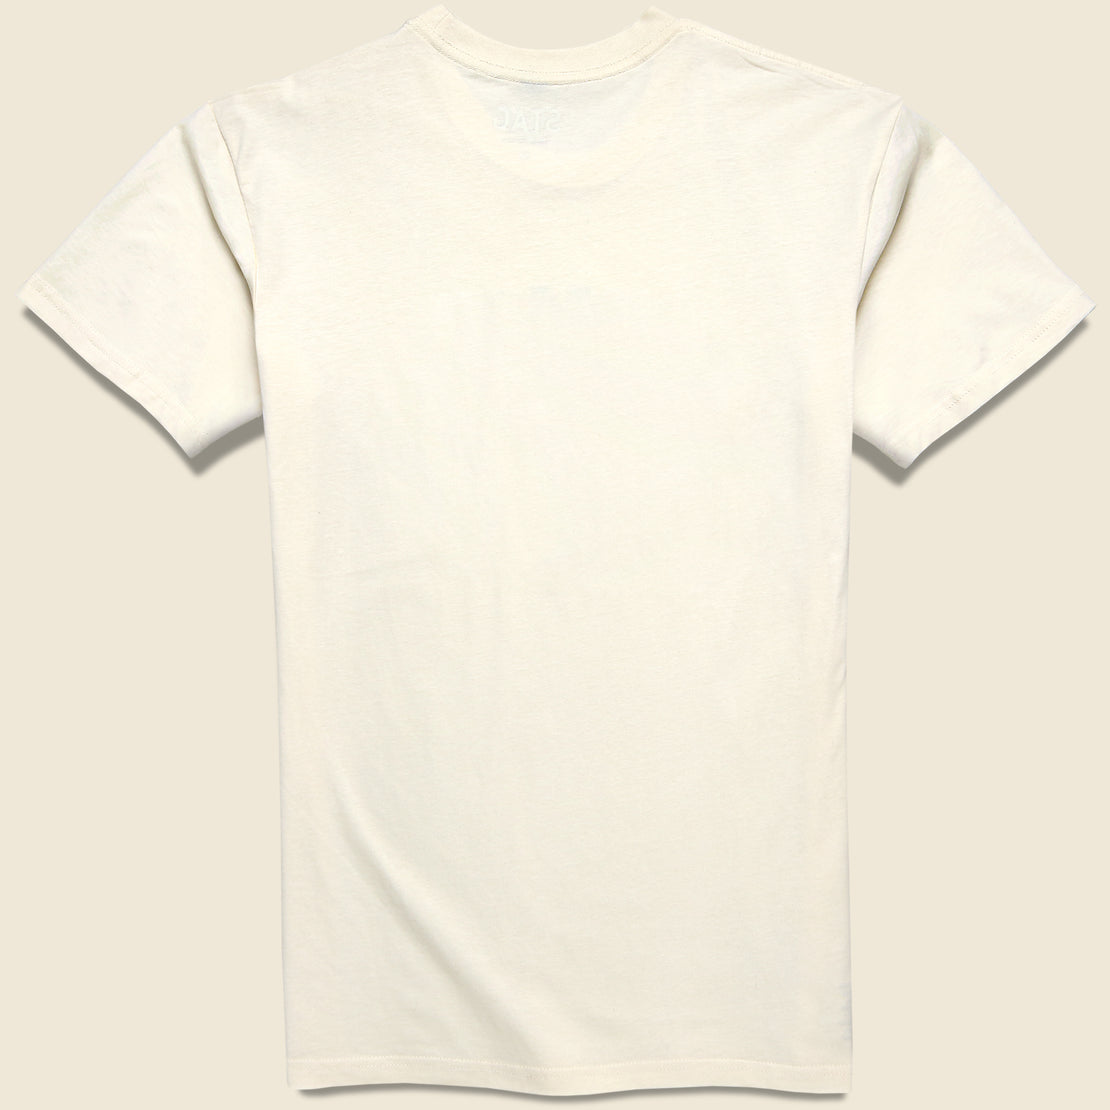 Meet Up Tee - White - STAG - STAG Provisions - Tops - S/S Tee